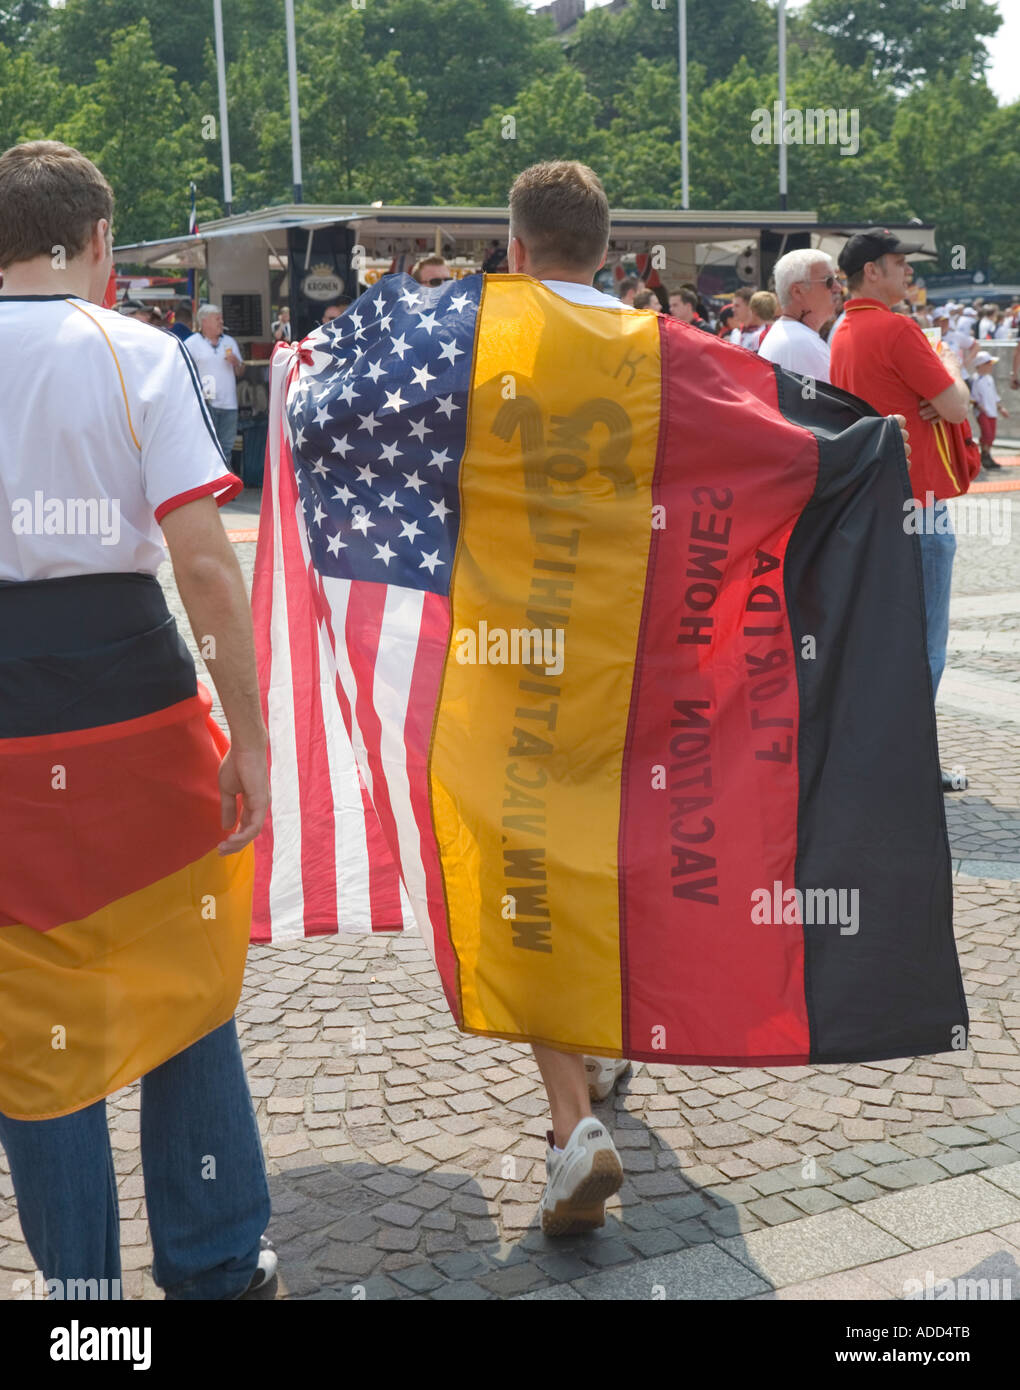 A football fan wearing a German and an American flag on his back at a public viewing event Stock Photo